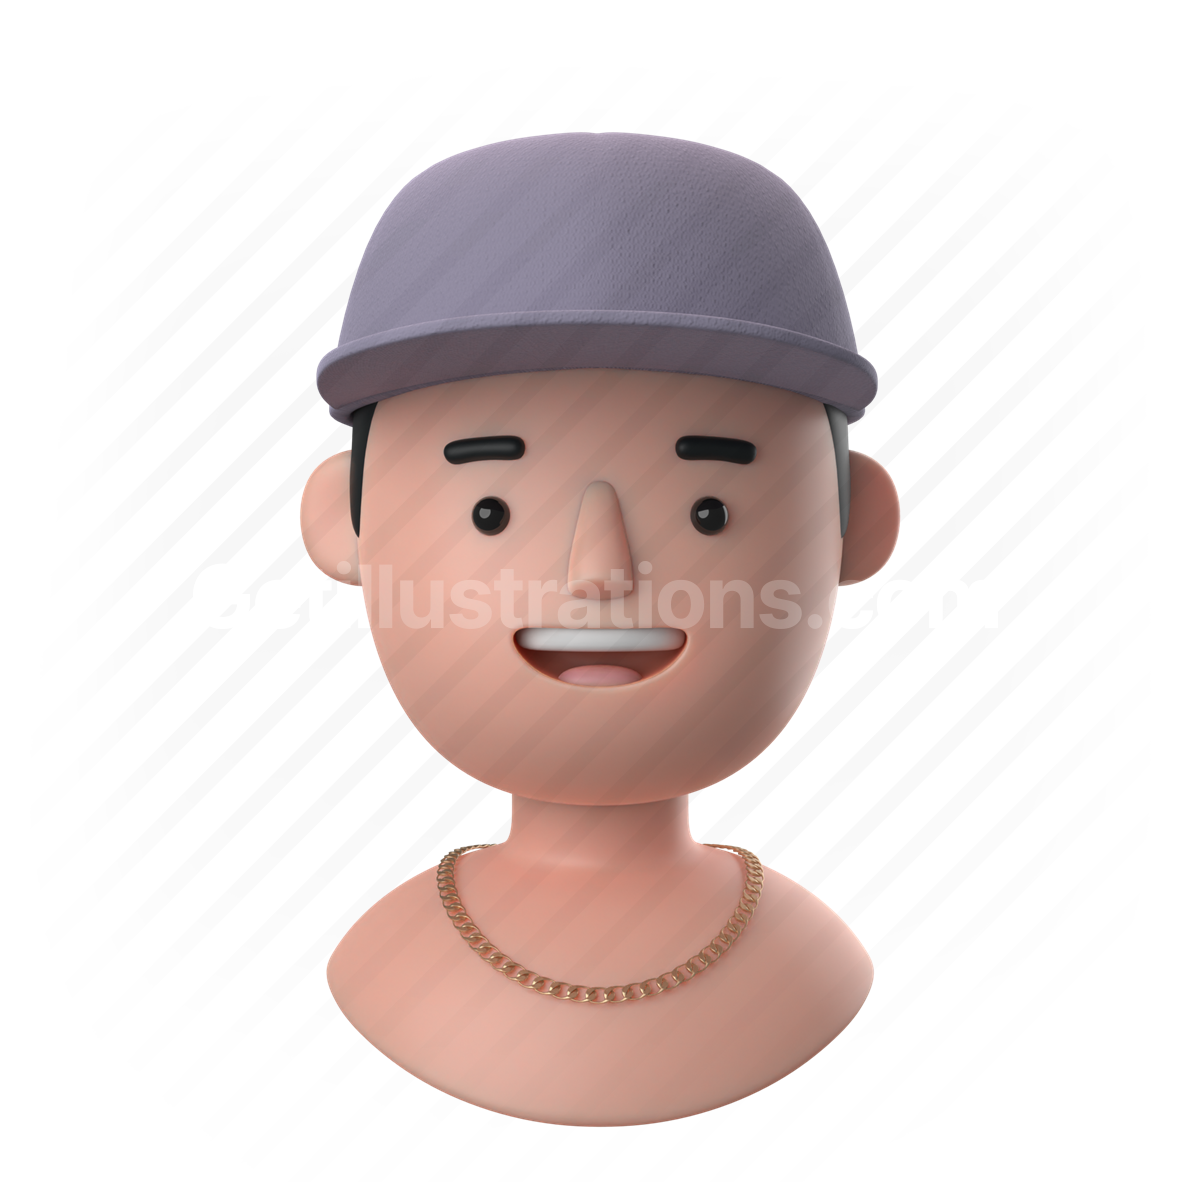 man, male, people, person, necklace, shirtless, baseball cap, cap